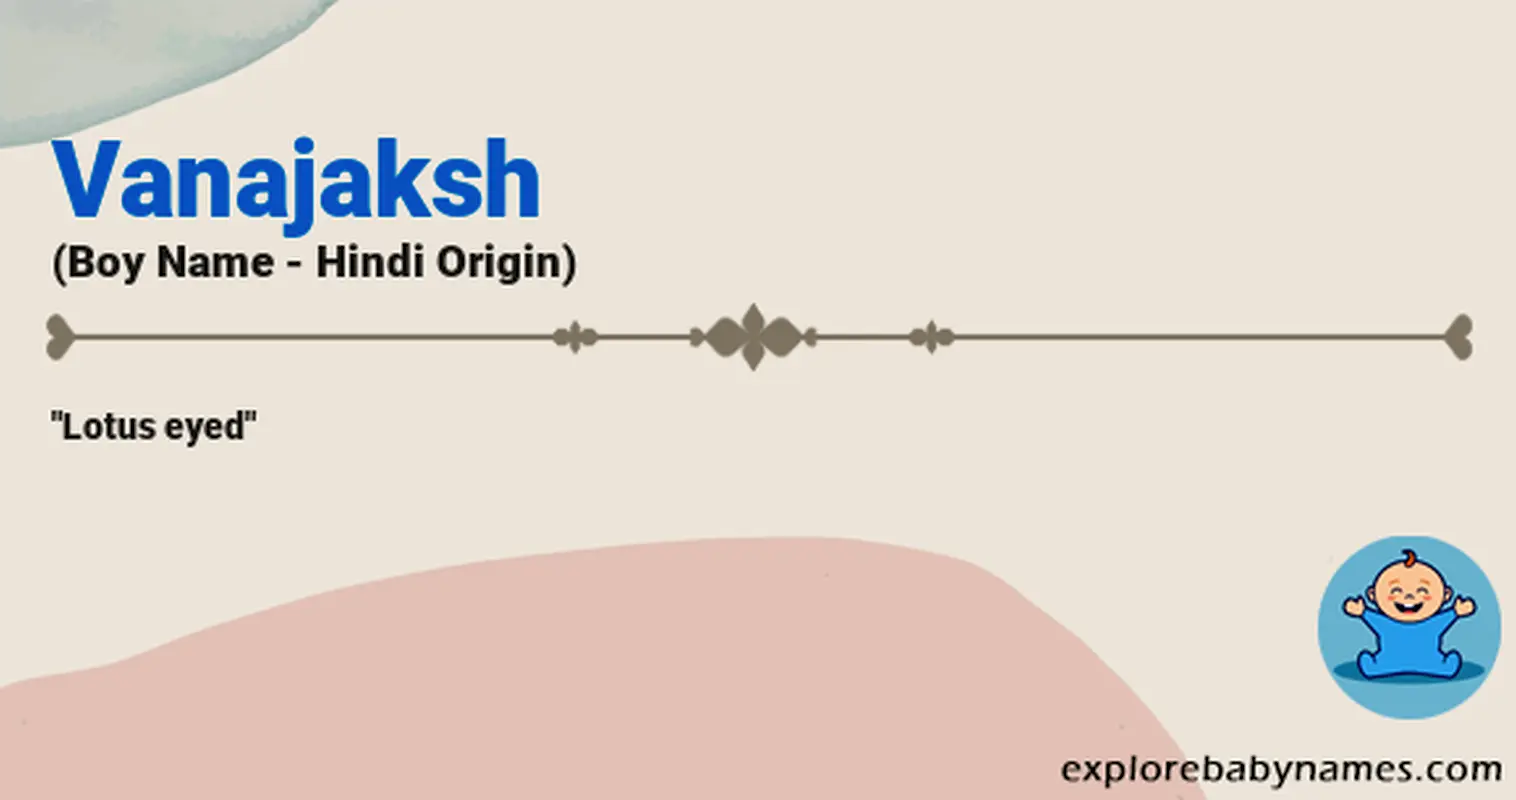 Meaning of Vanajaksh